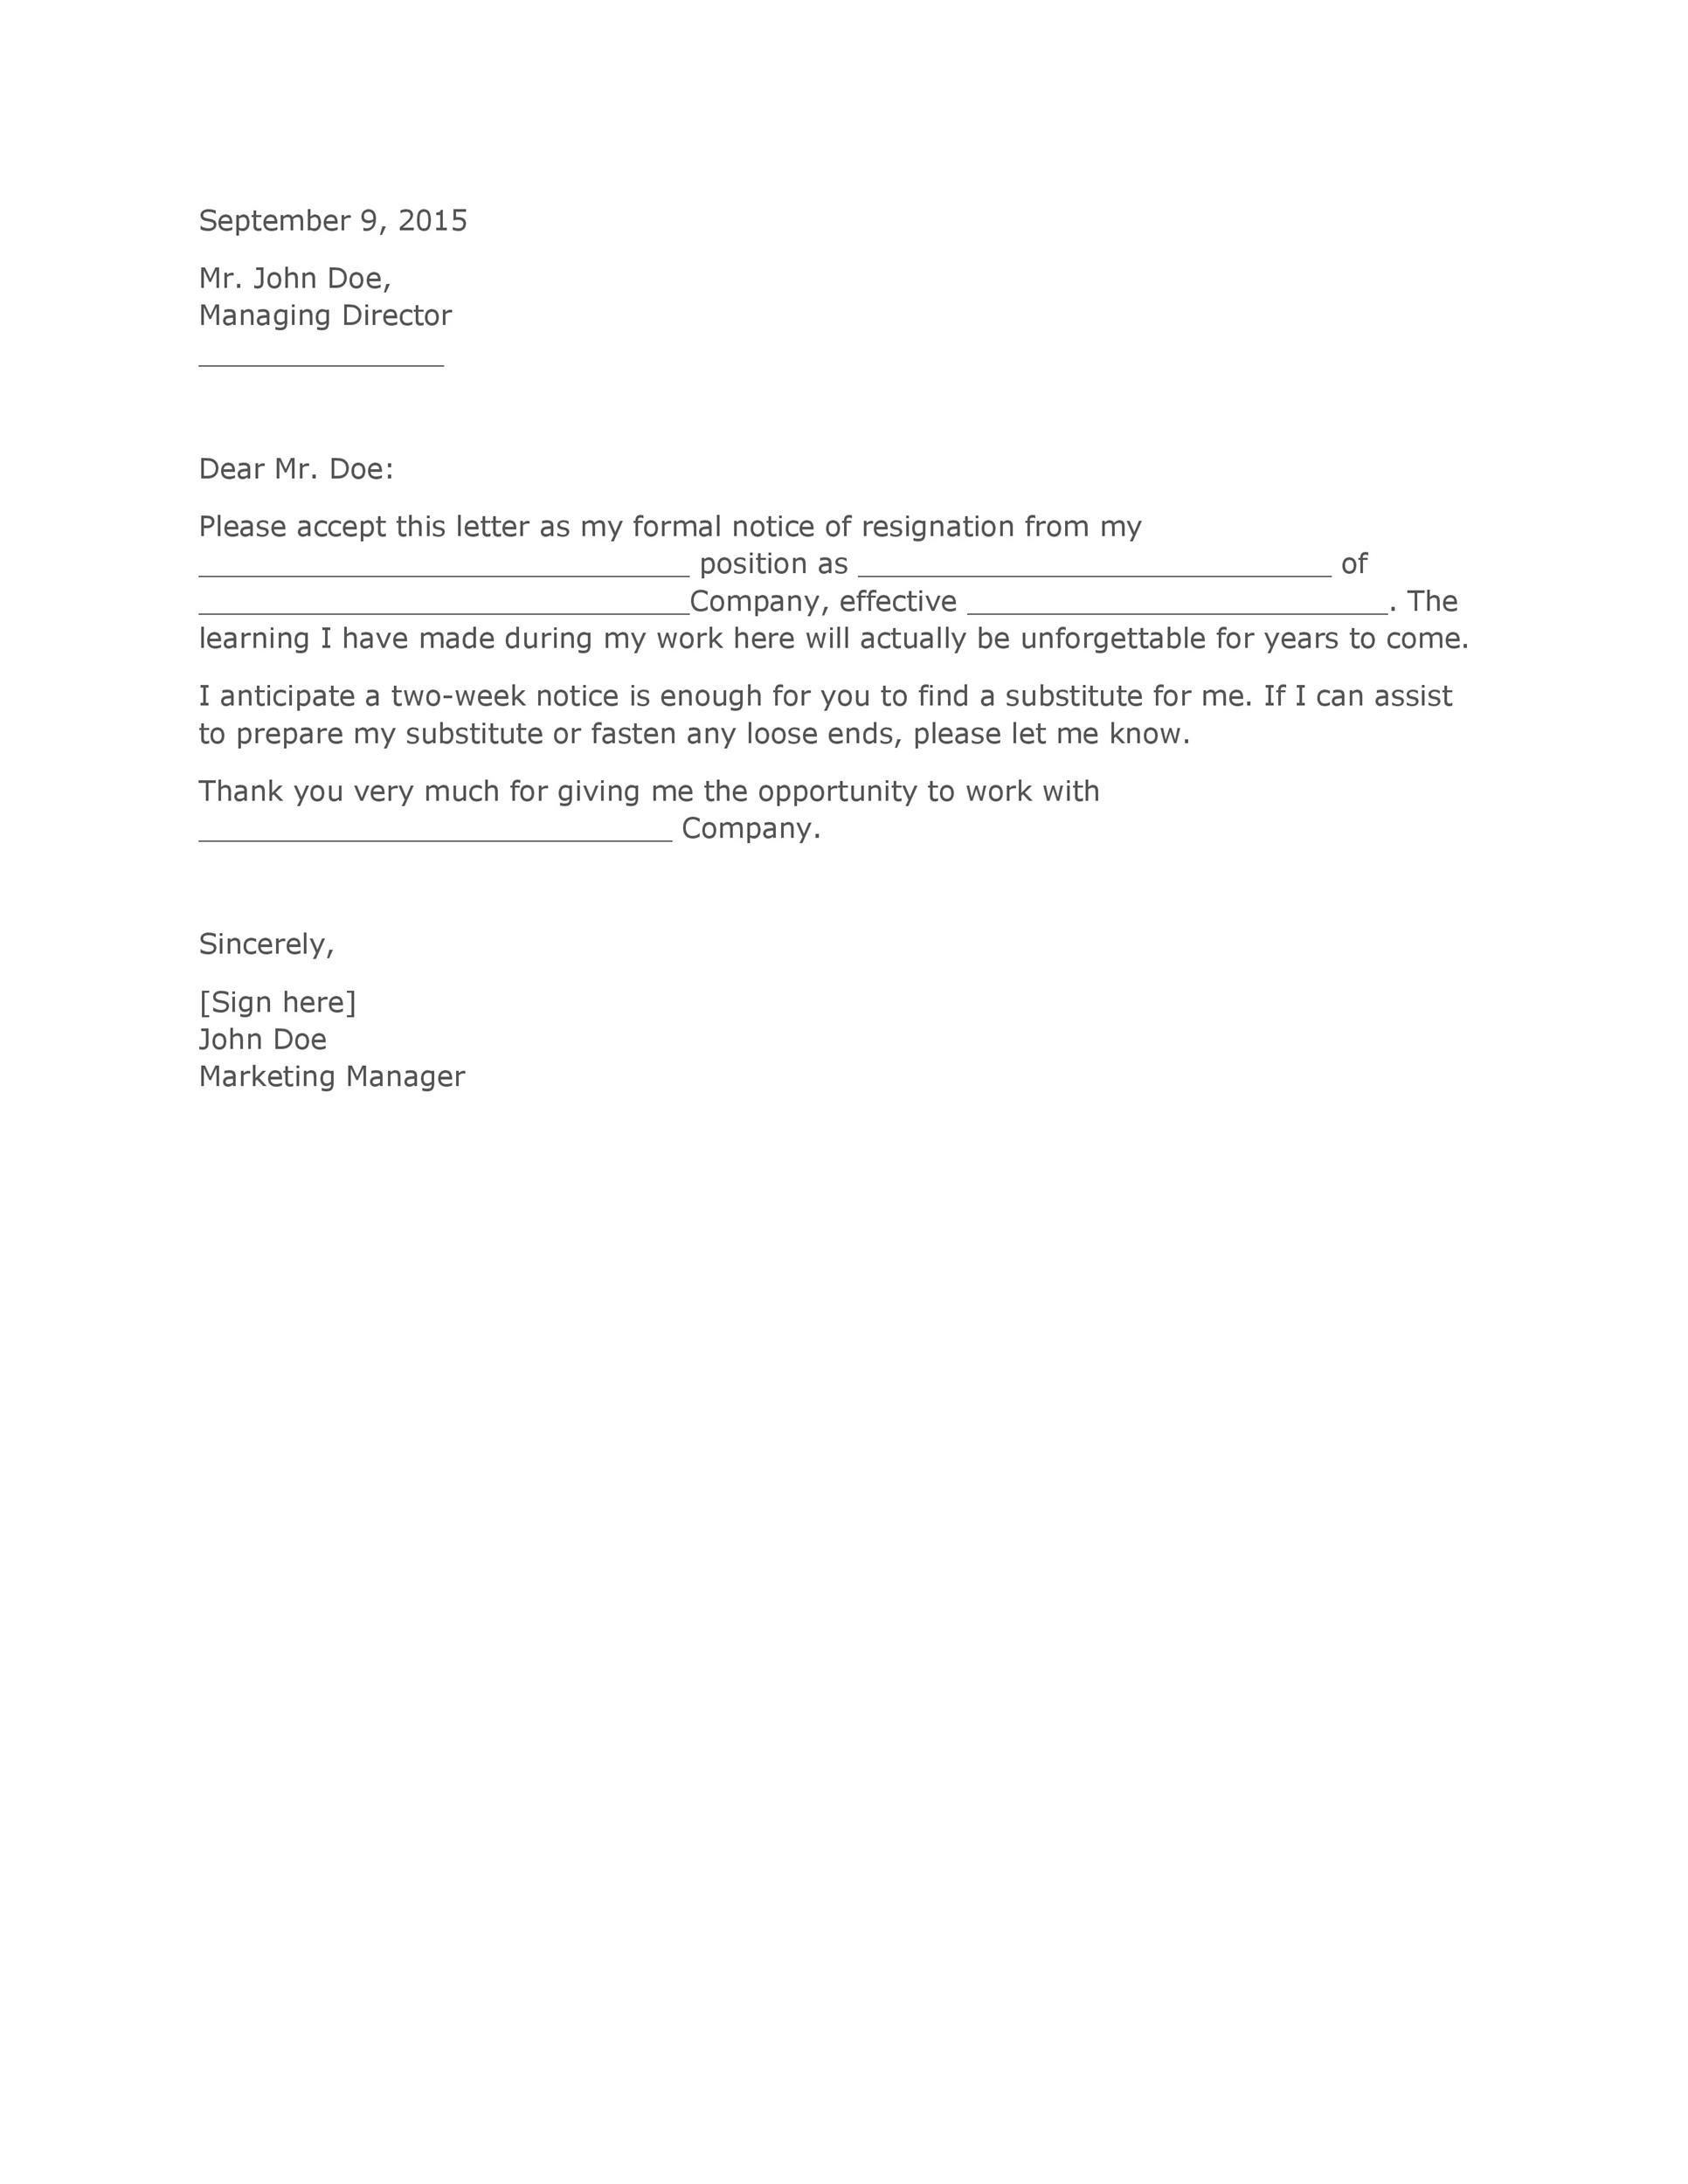 40-two-weeks-notice-letters-resignation-letter-templates